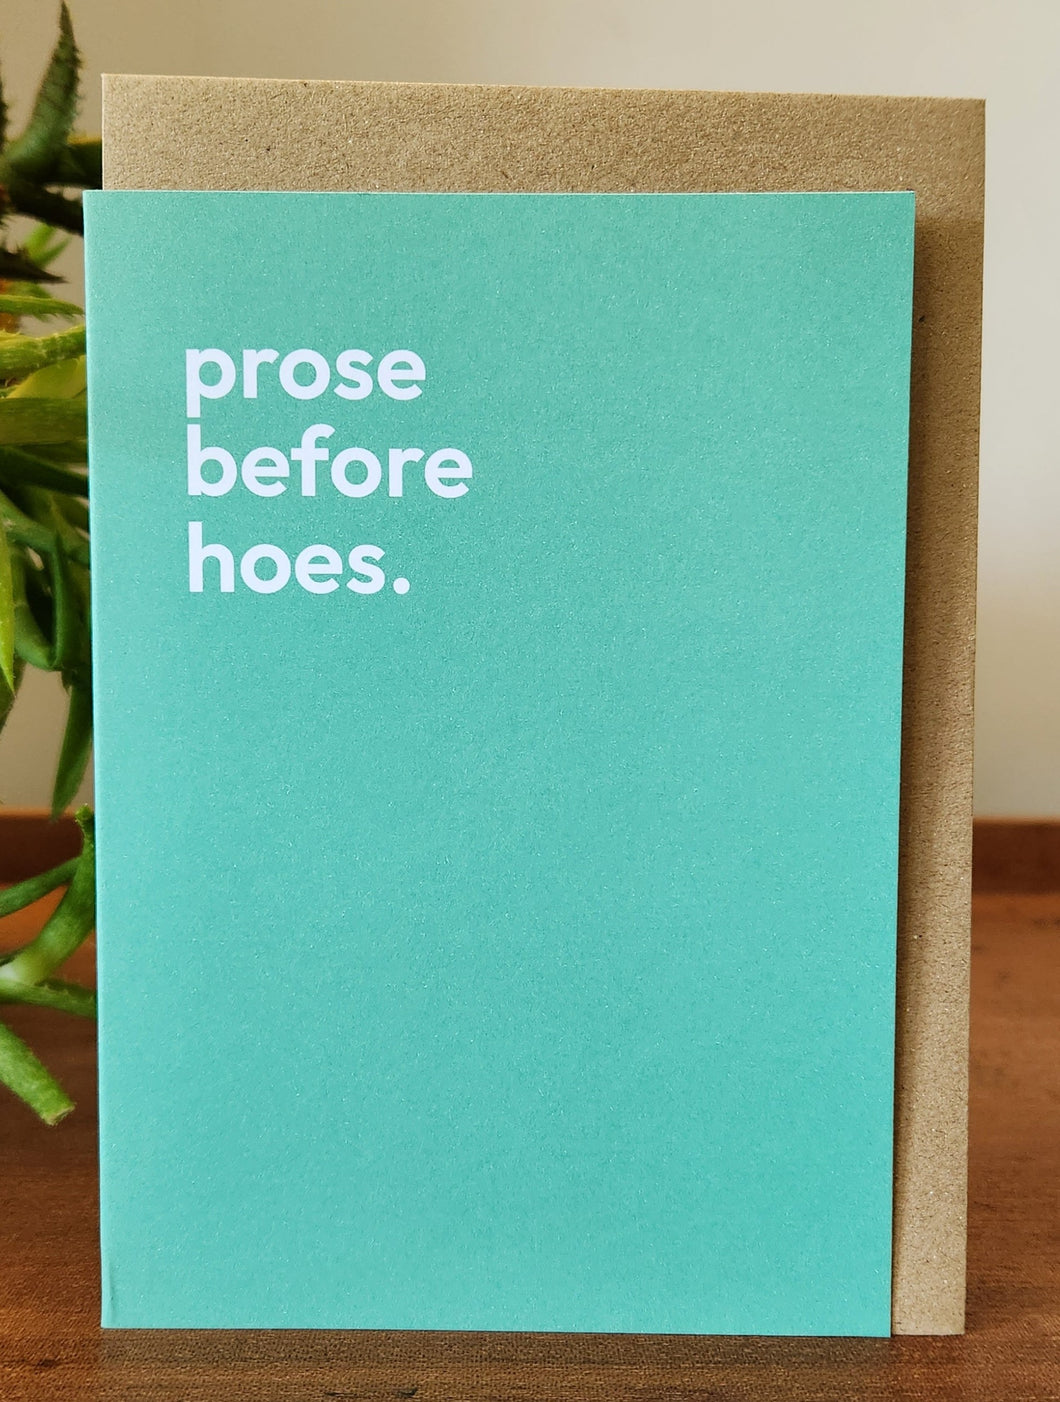 Prose before hoes - Greeting Card